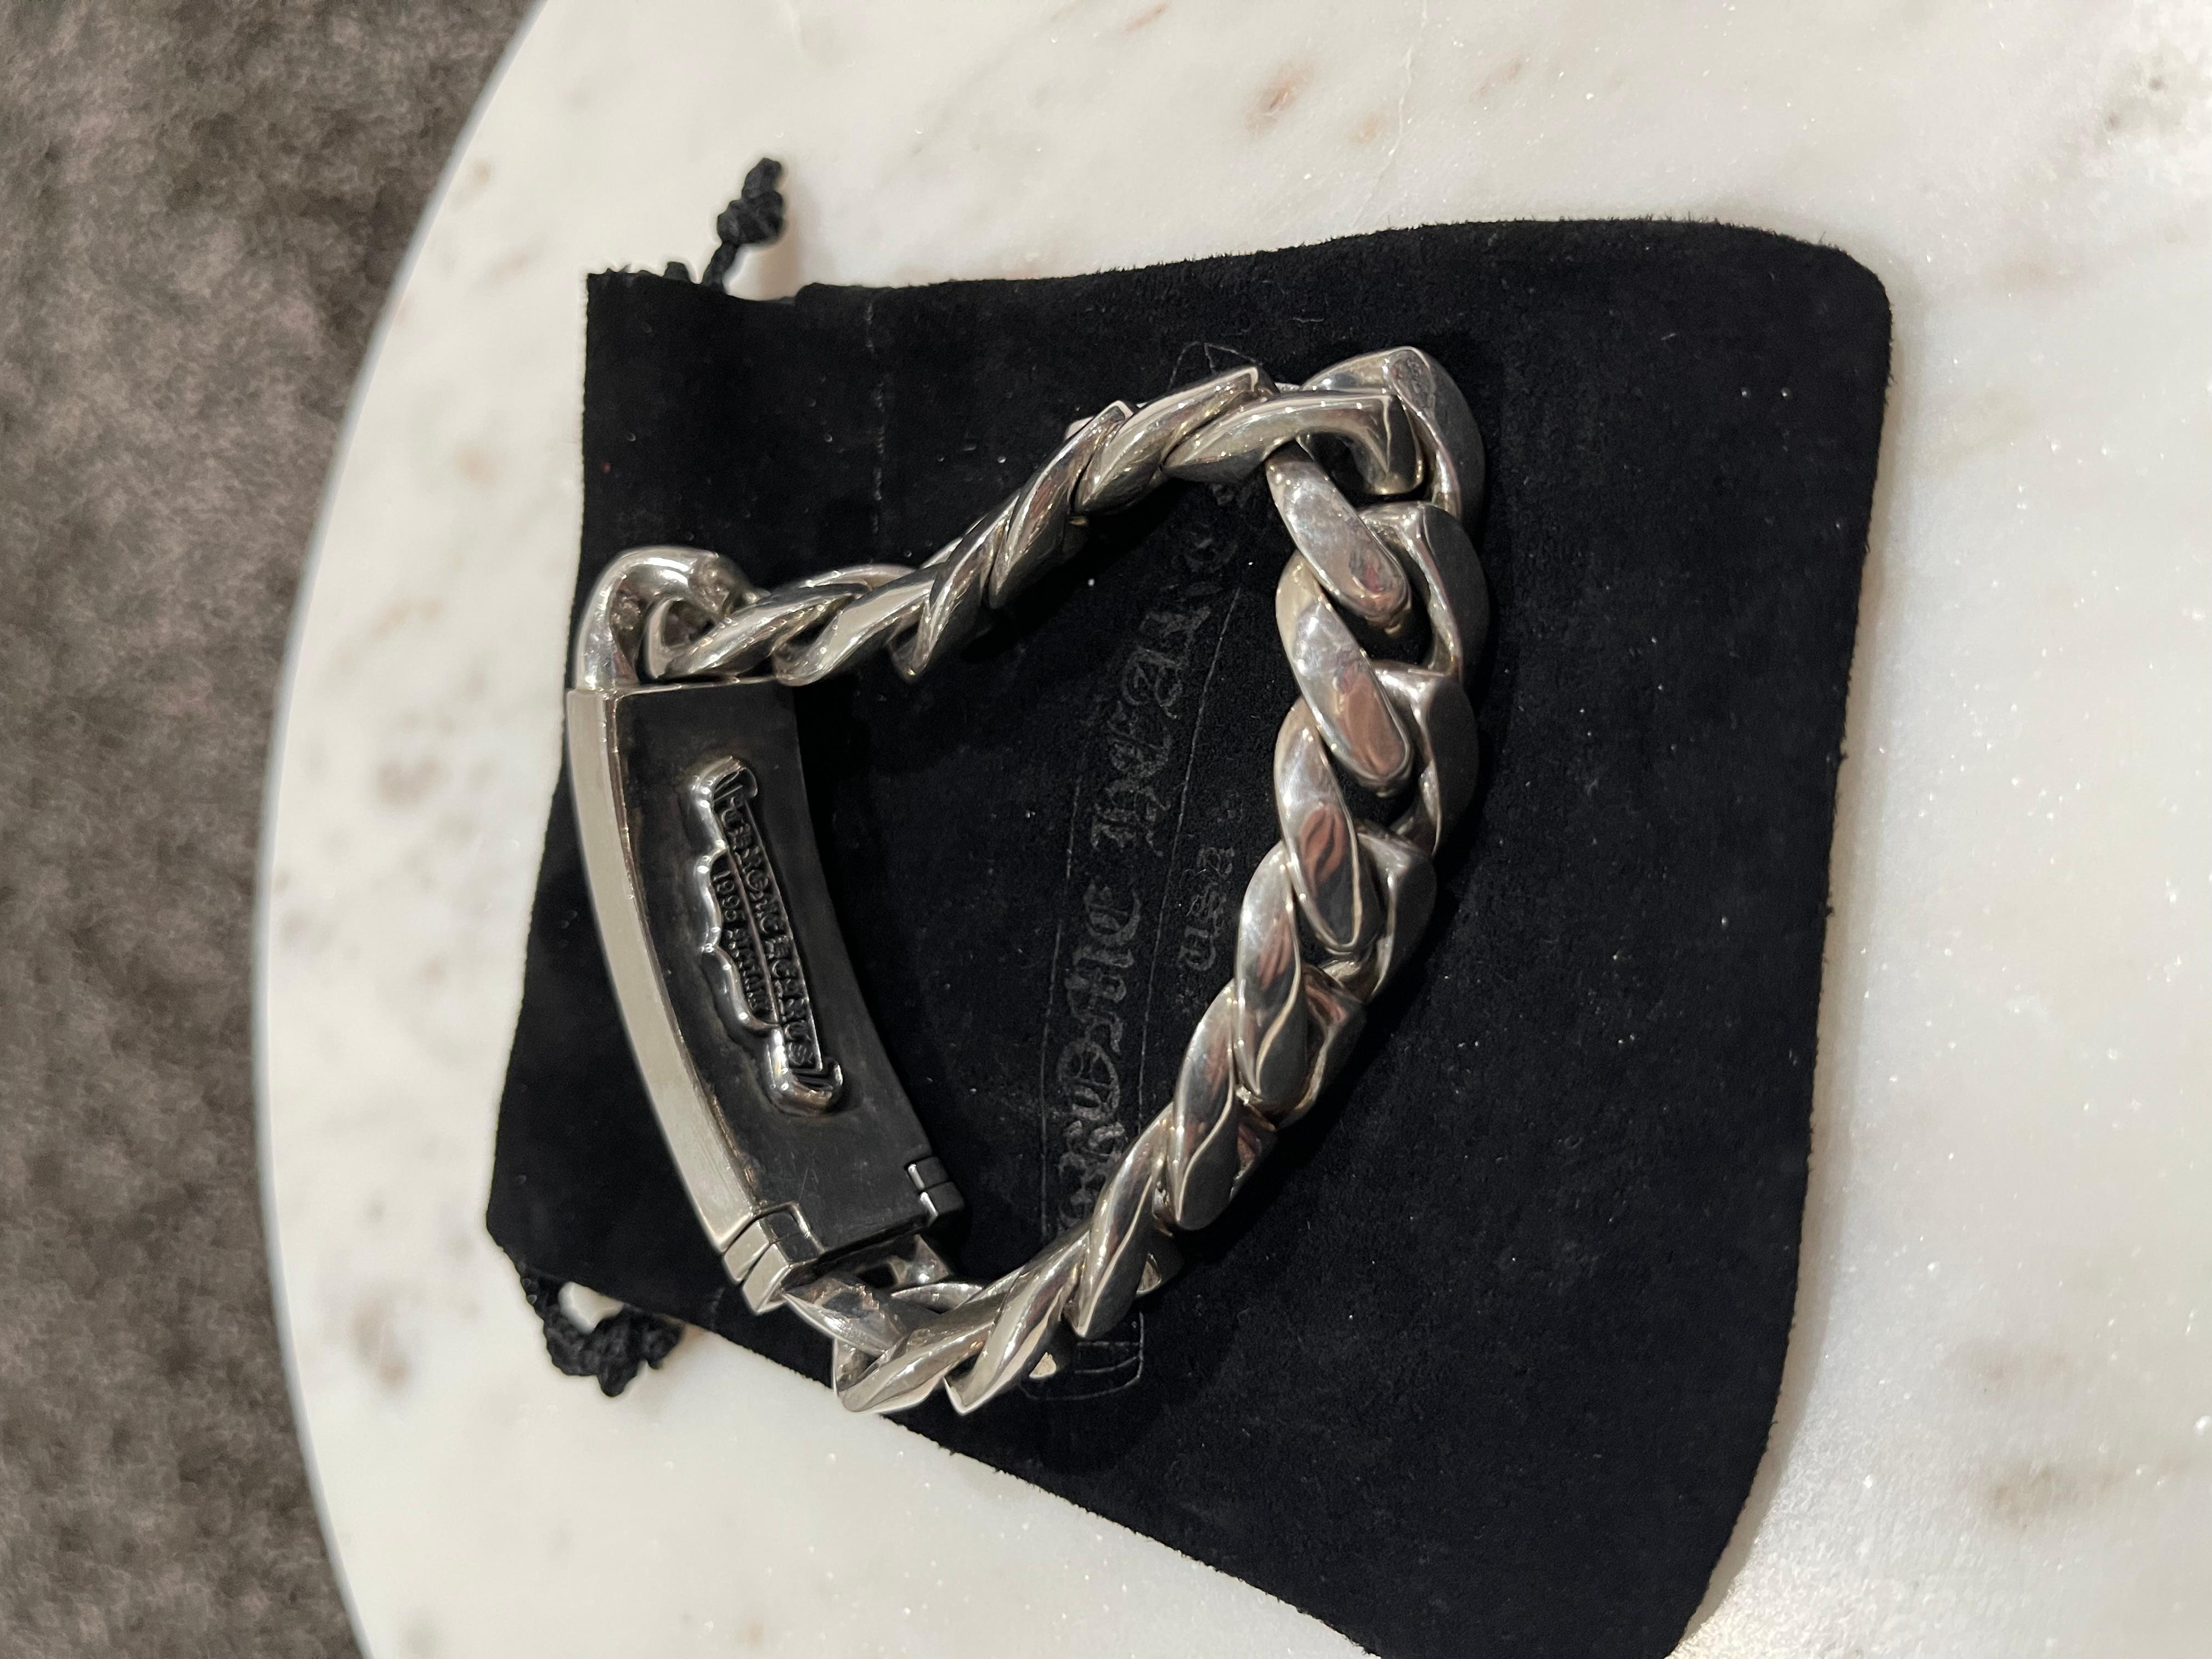 Chrome Hearts Big Cuban Dagger ID Silver Bracelet
Brand new w/ box and dust bag
Meaurements are pictured
Rare Chrome Hearts Heart Dagger Bracelet.

Well below retail price!